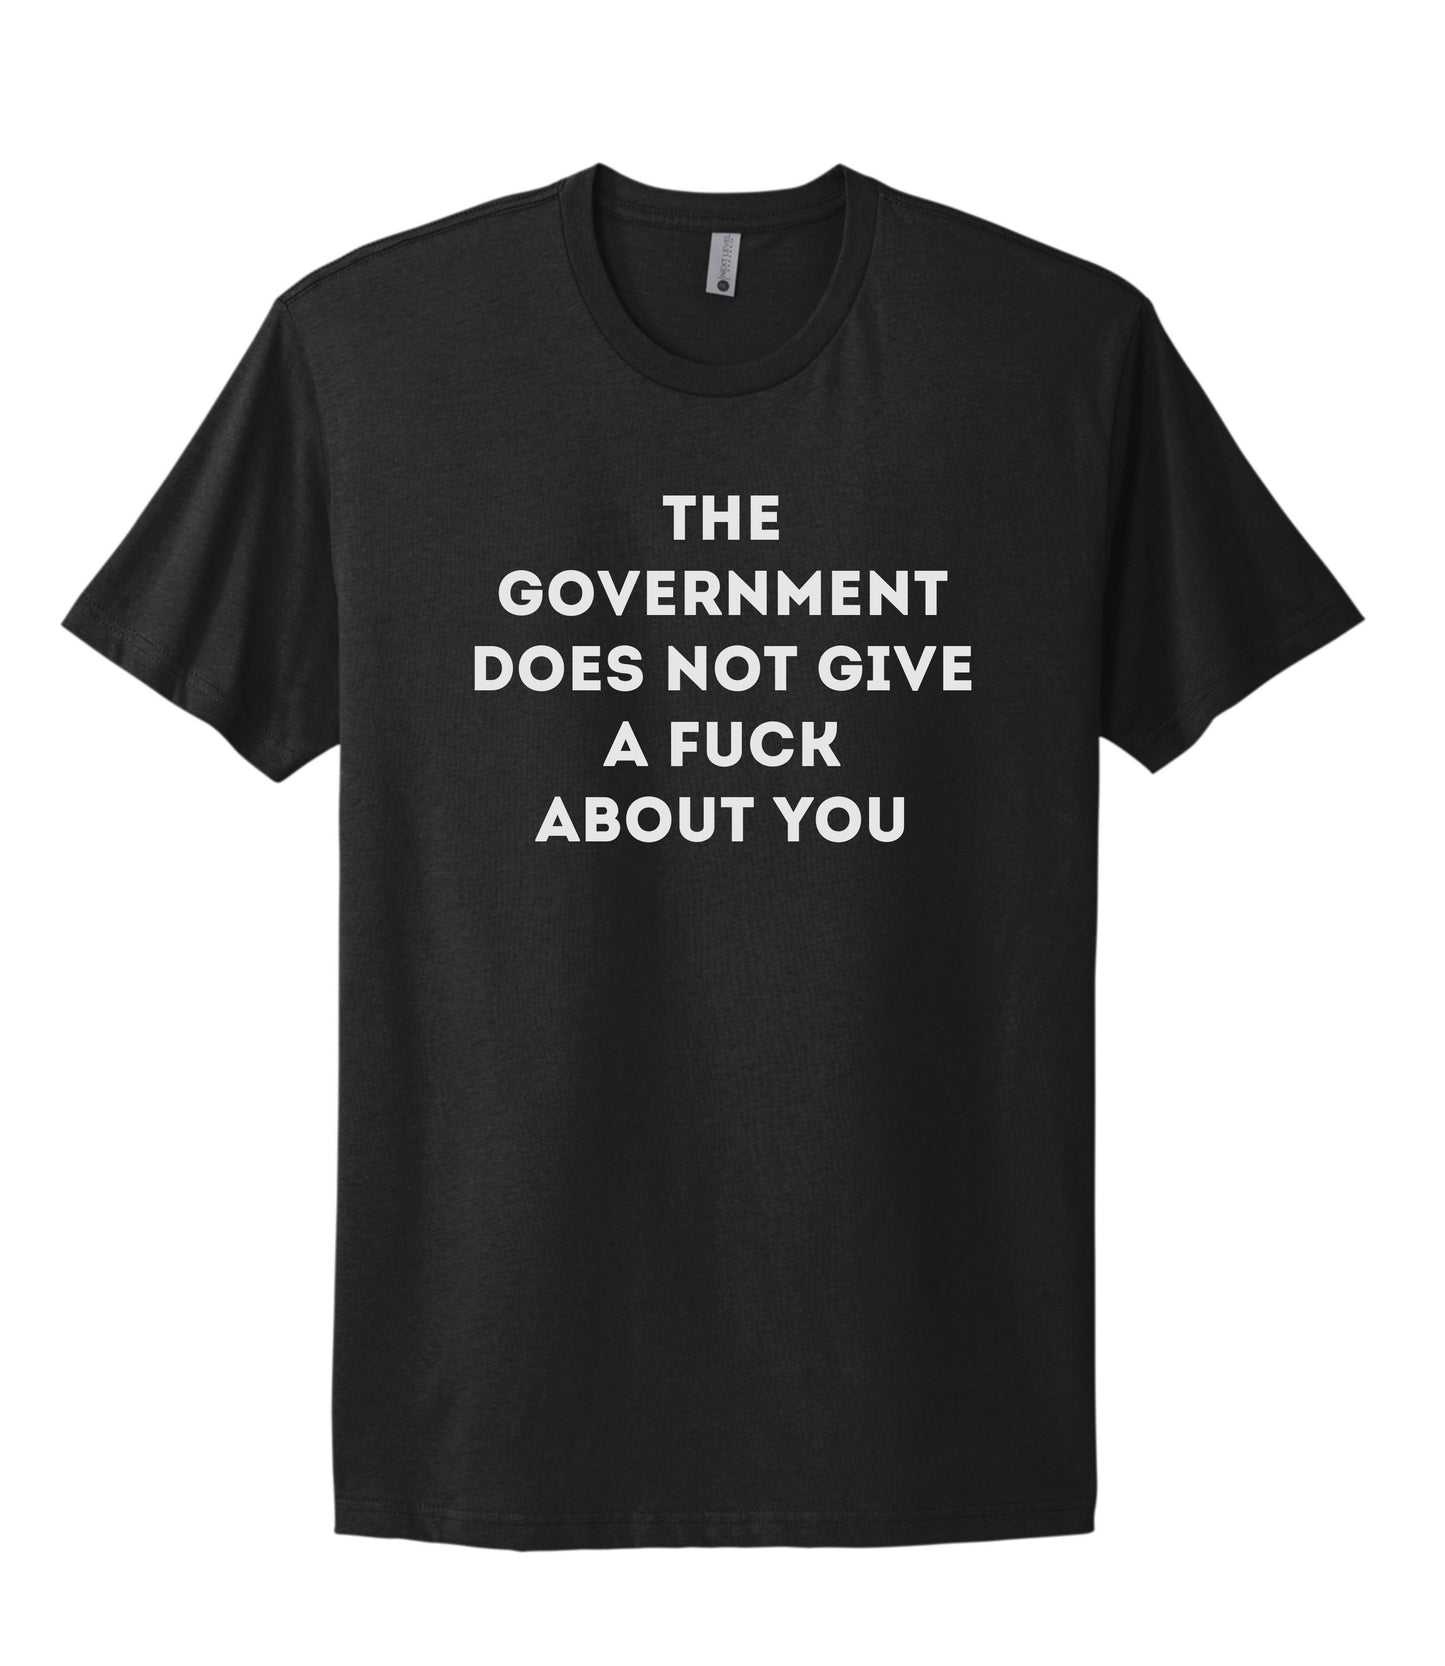 THE GOVERNMENT DOES NOT GIVE A FUCK ABOUT YOU t-shirt